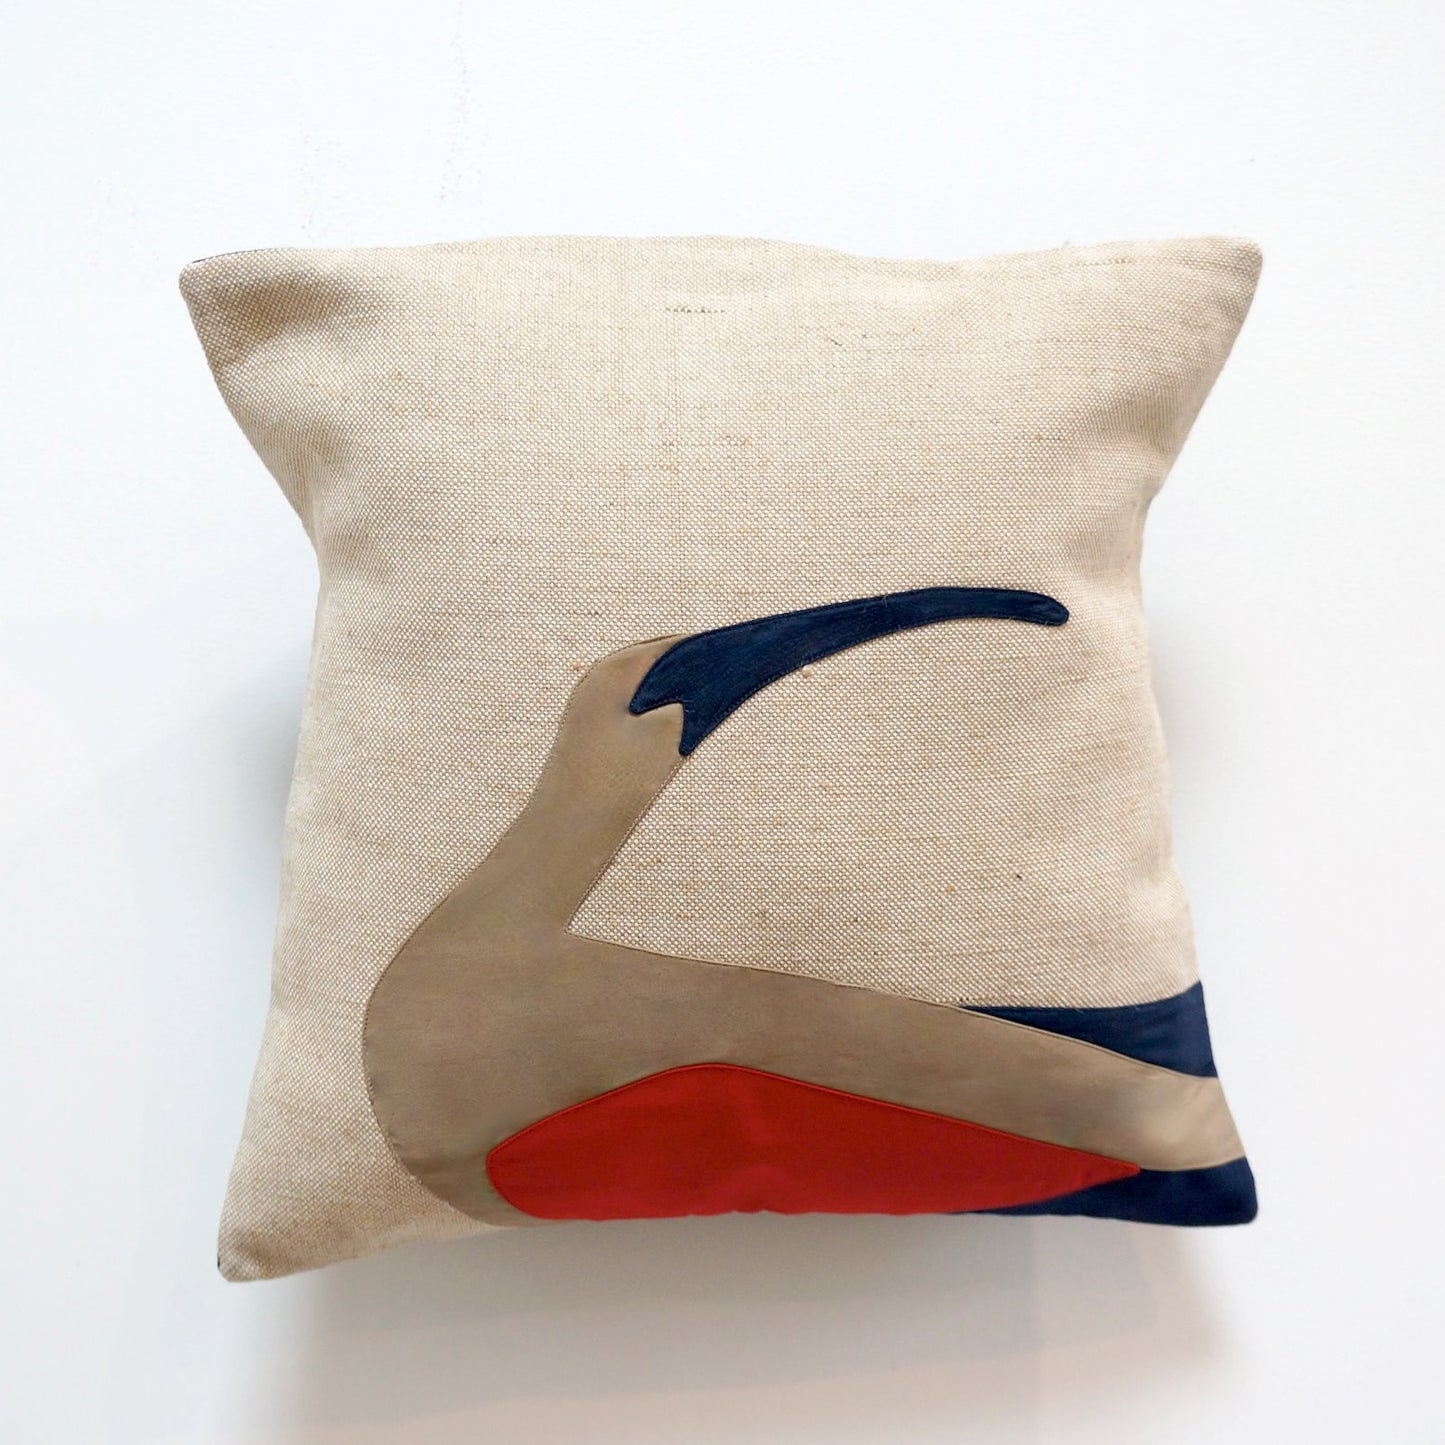 Ibis Cushion in Red and Navy Blue WEFTshop 40cm 